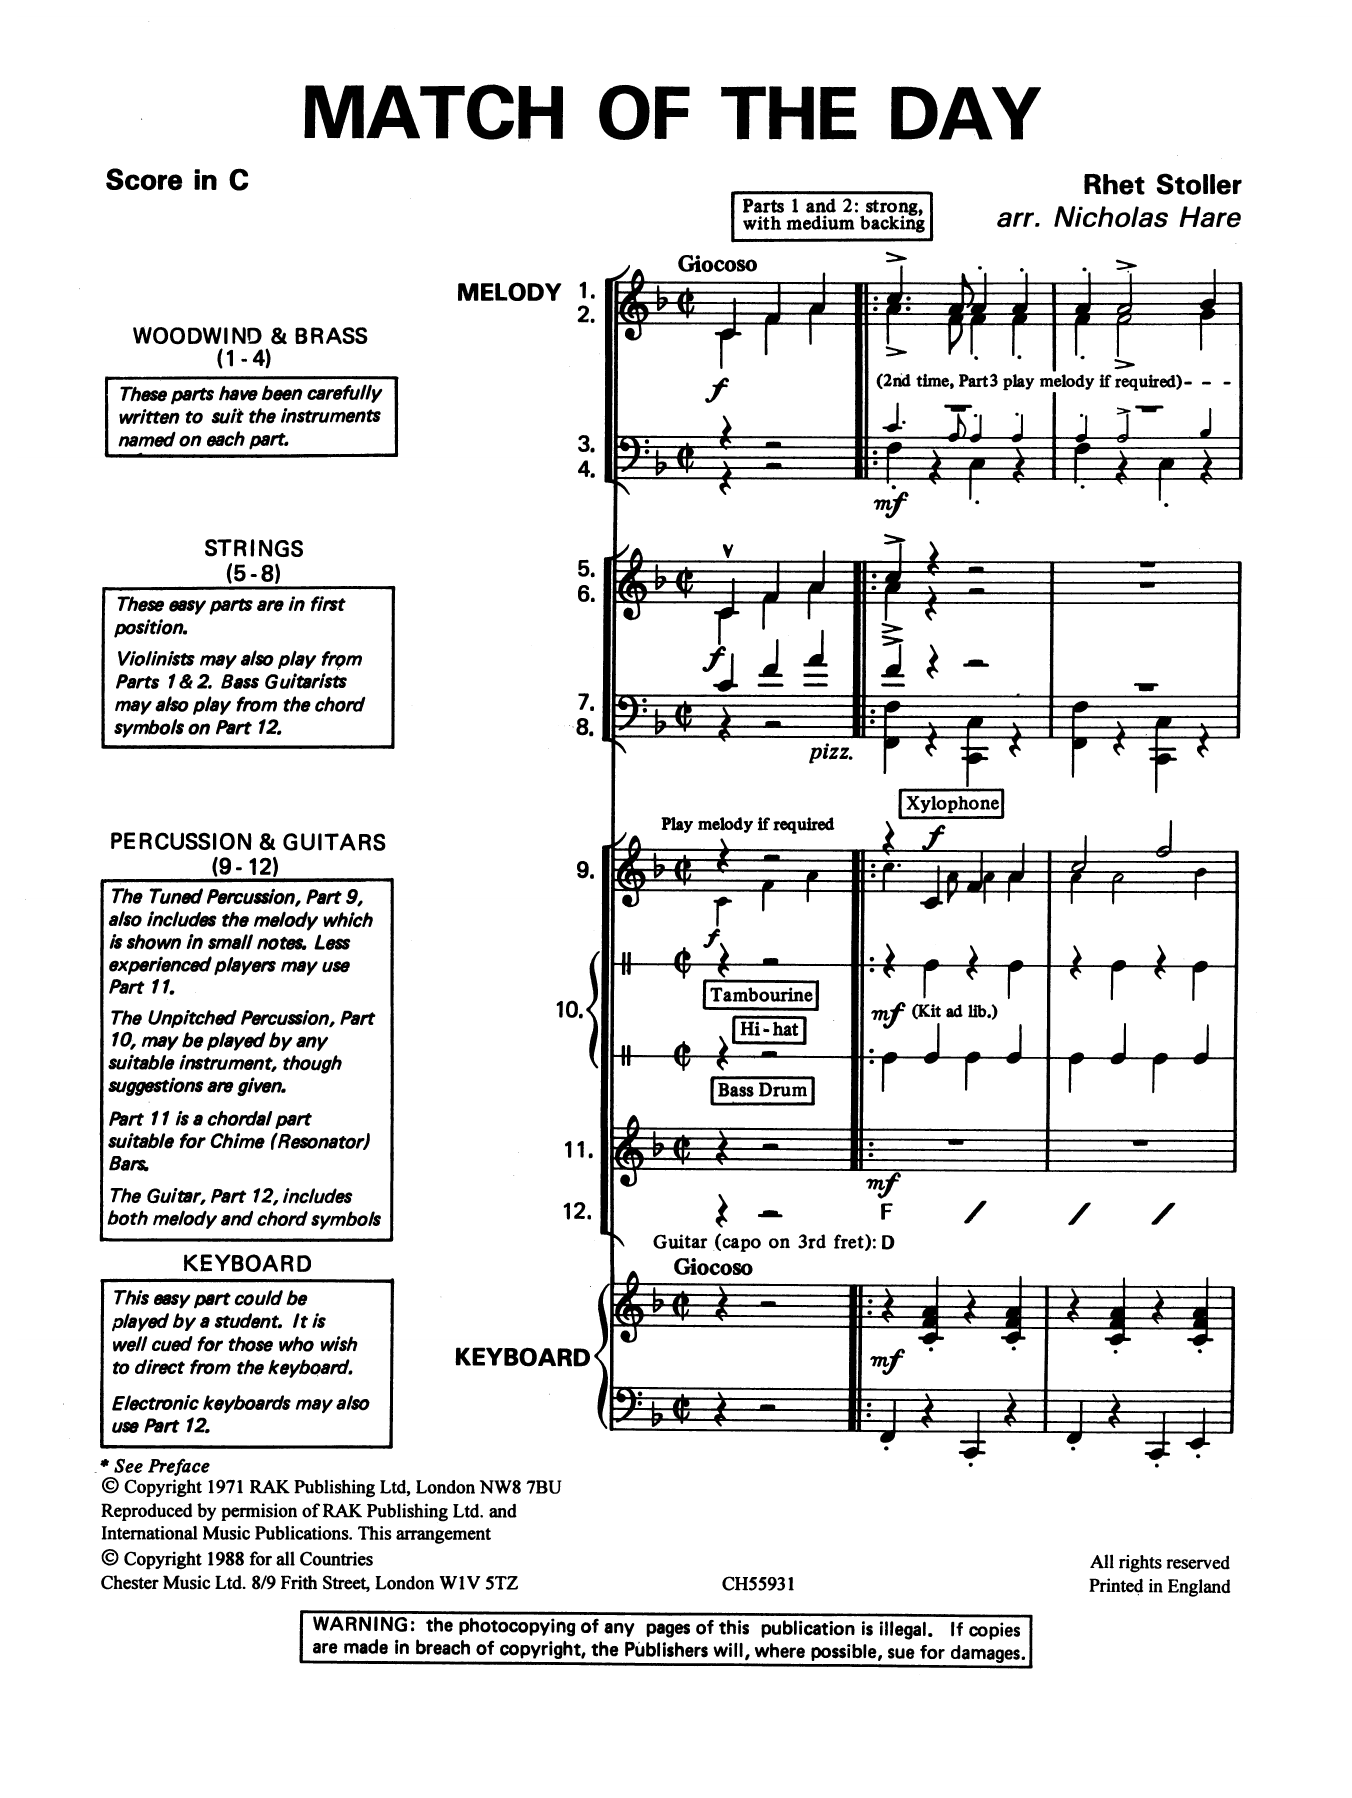 Download Barry Stoller Match Of The Day Sheet Music